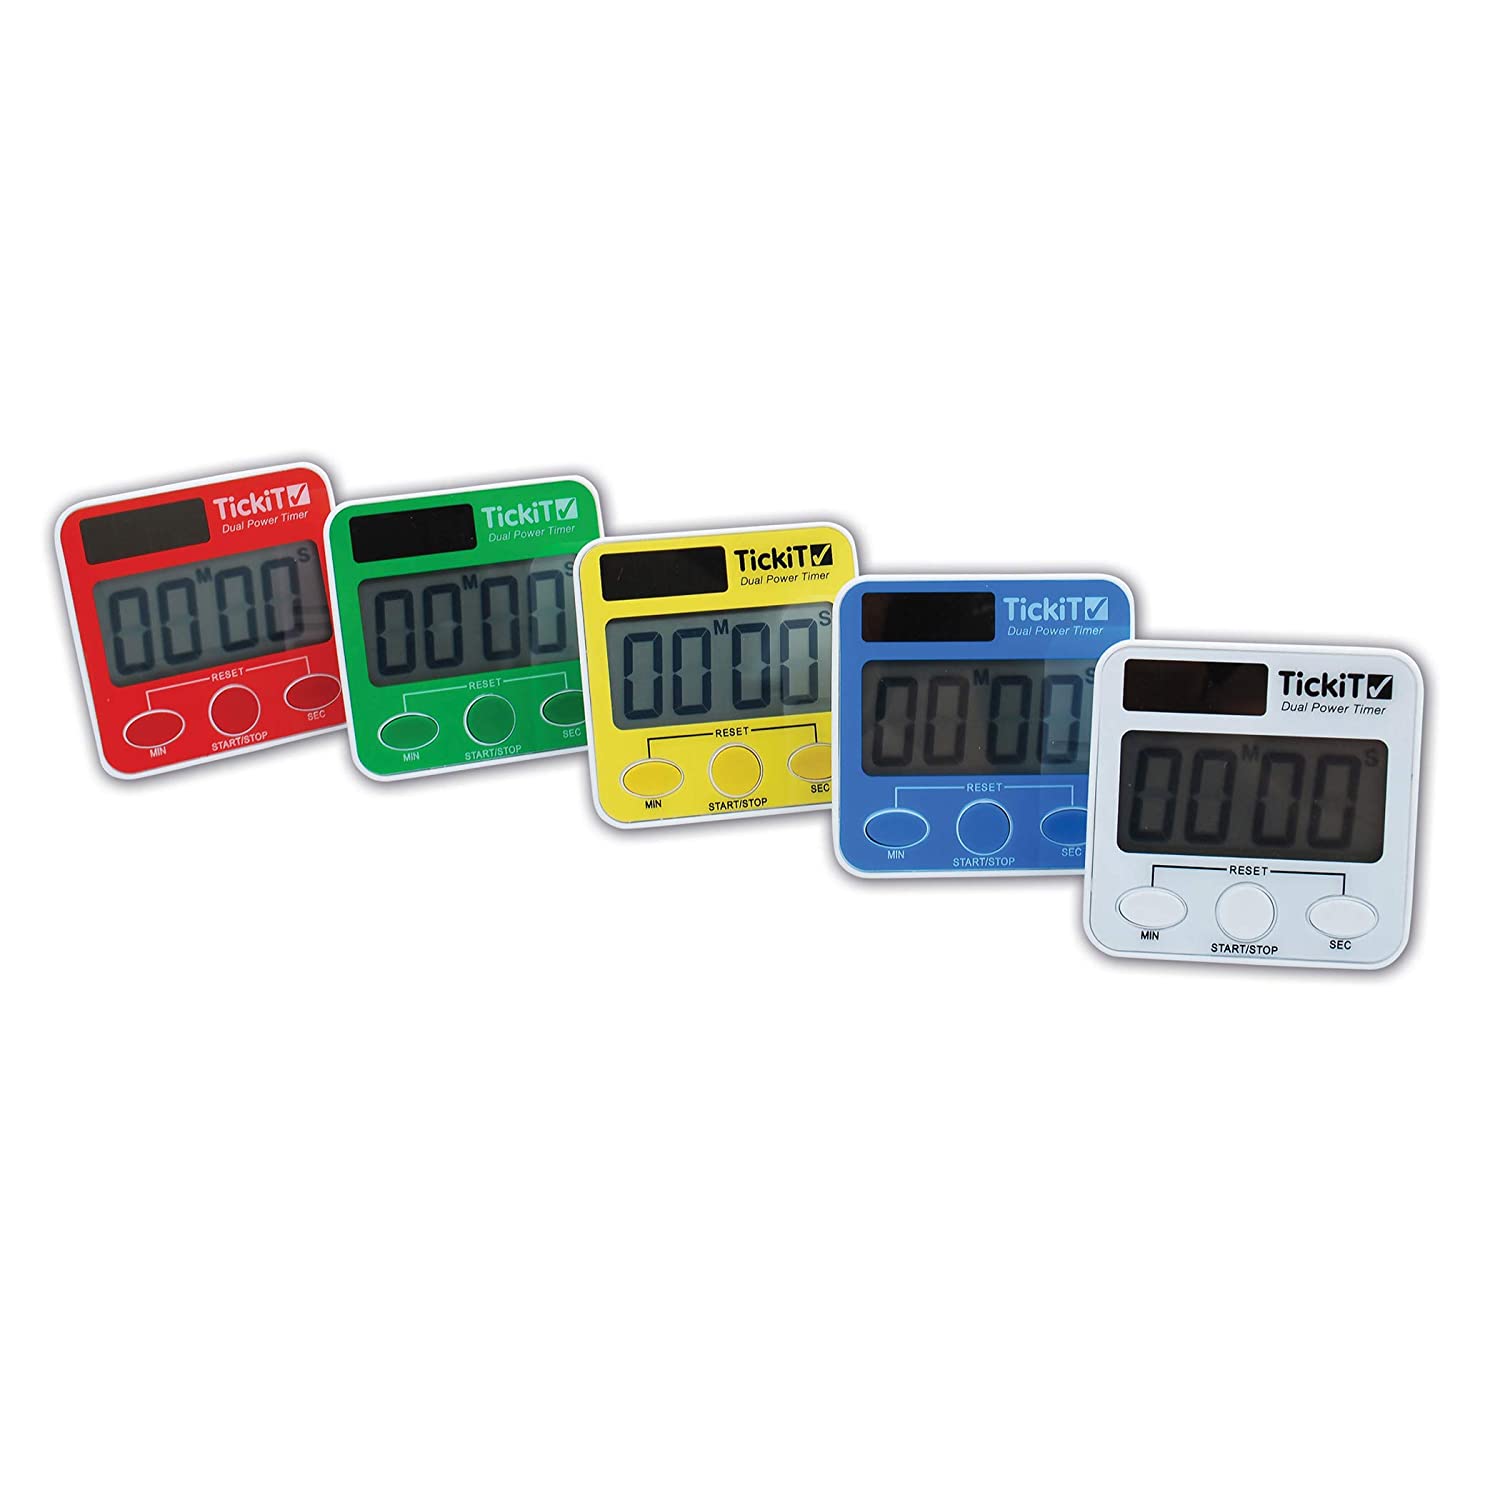 TickiT Dual Power Timers - Set of 5 - Red, Yellow, Green, Blue, White - Solar and Battery Powered Digital Timers - Includes Stand and Wall Mount Slot